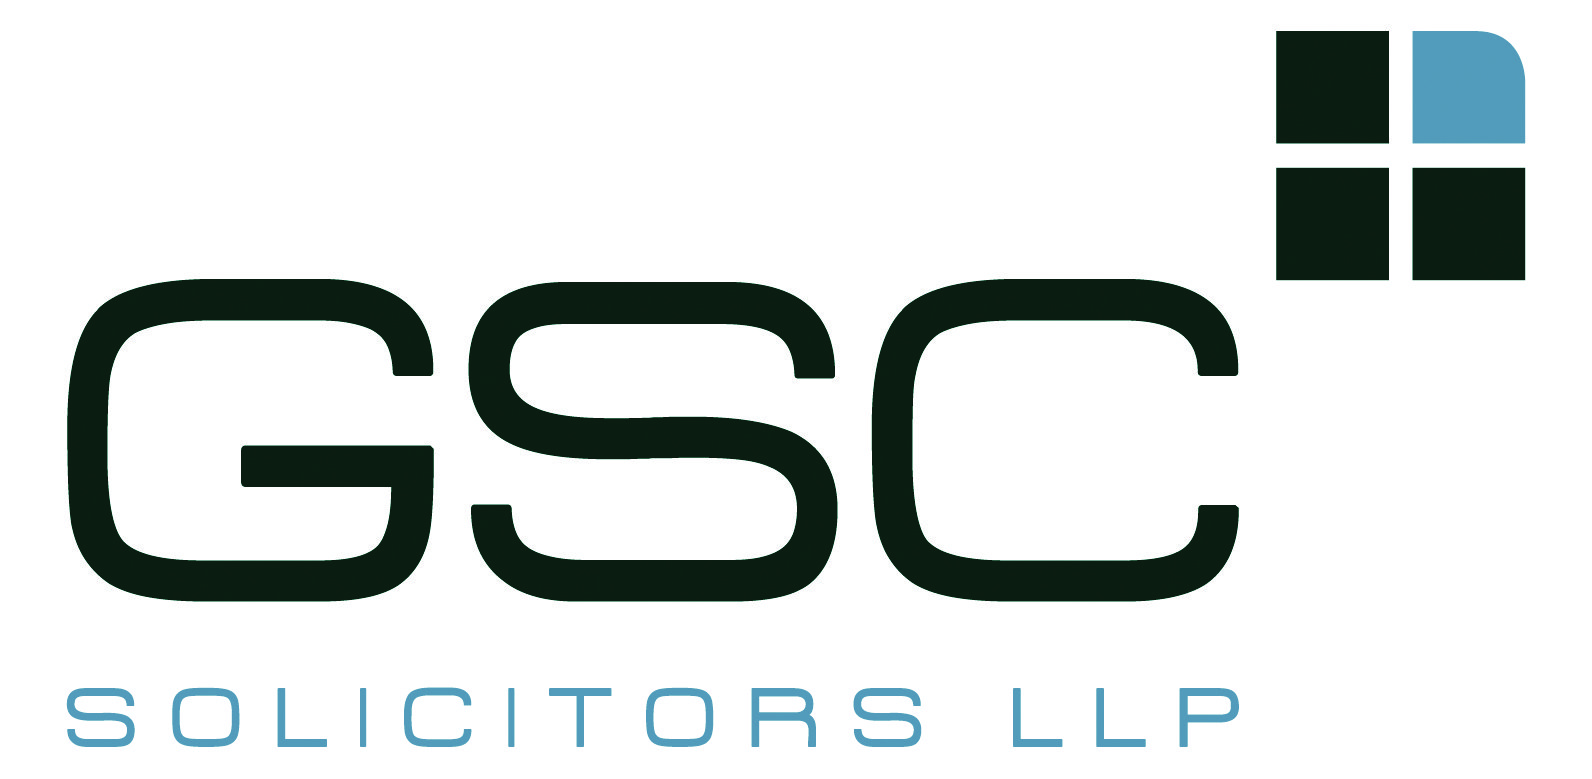 GSC Solicitors Logo in Blue